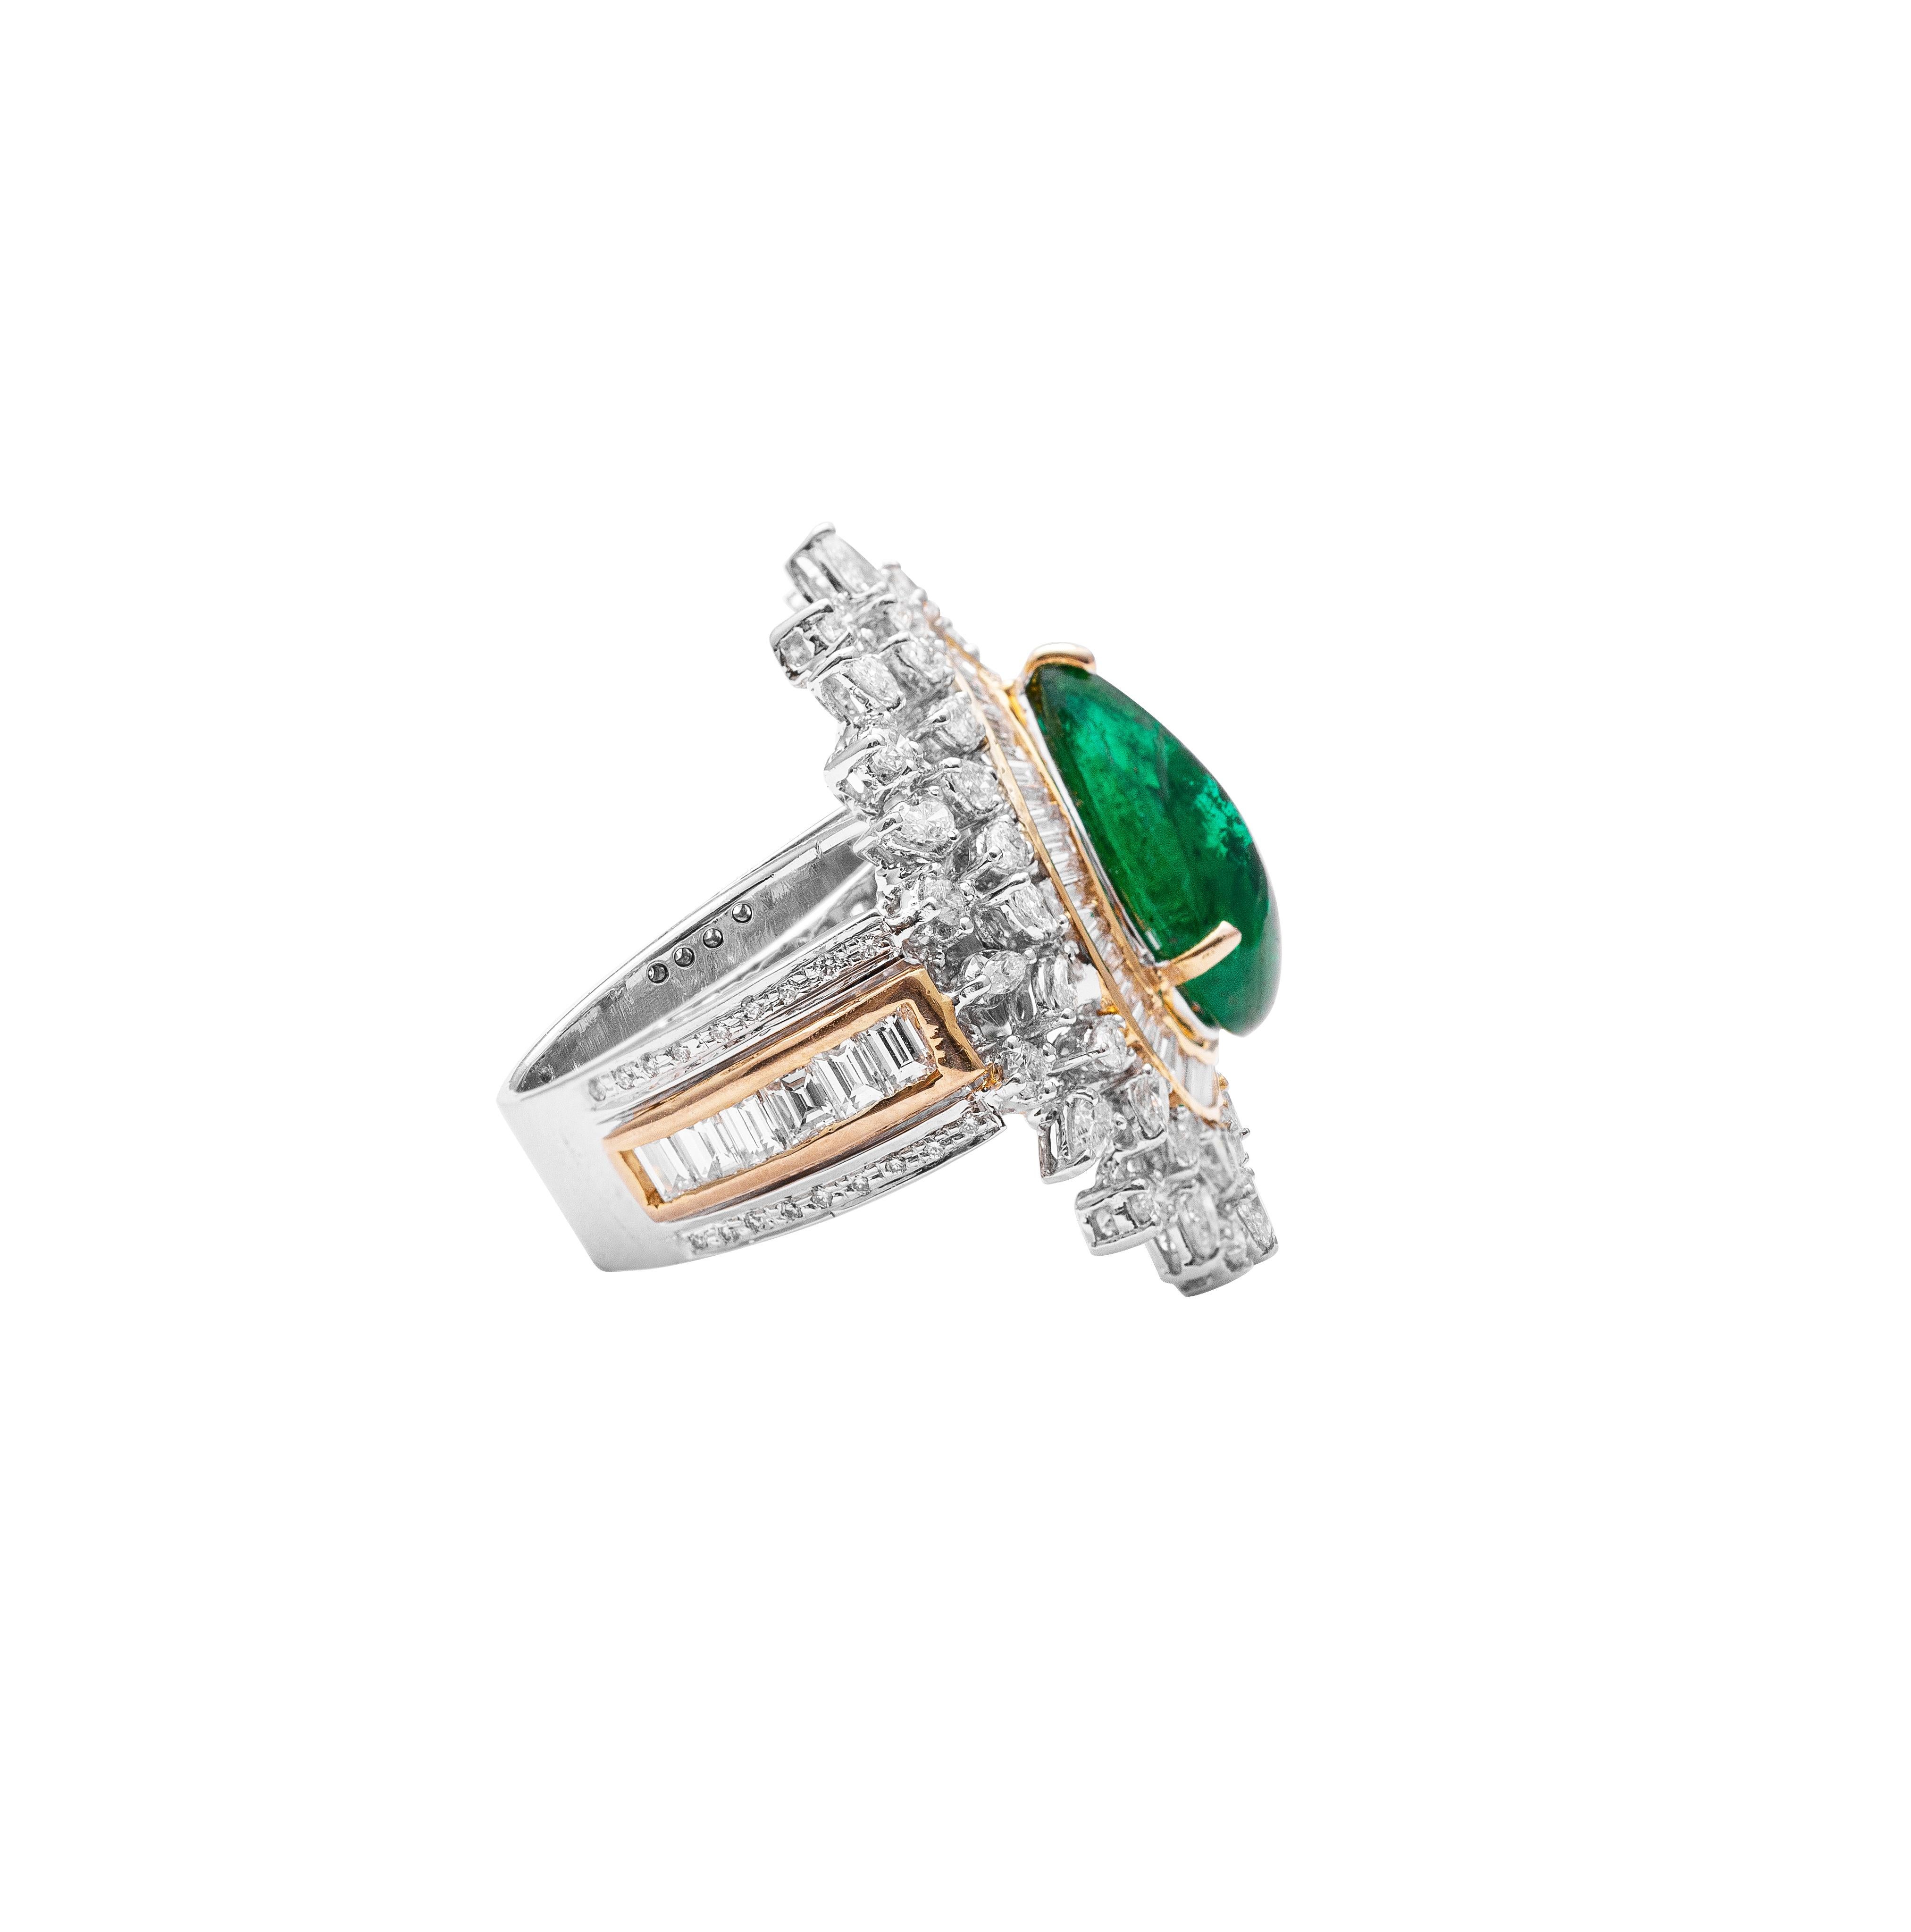 18 Karat Gold Diamond and Emerald Cocktail Ring 

Beautiful diamond & emerald cocktail ring set in 18 Karat gold, studded with white diamonds and a beautiful emerald cabachon.

Gold - 21.076gms
Diamond - 3.99 cts
Emerald - 5.13cts

